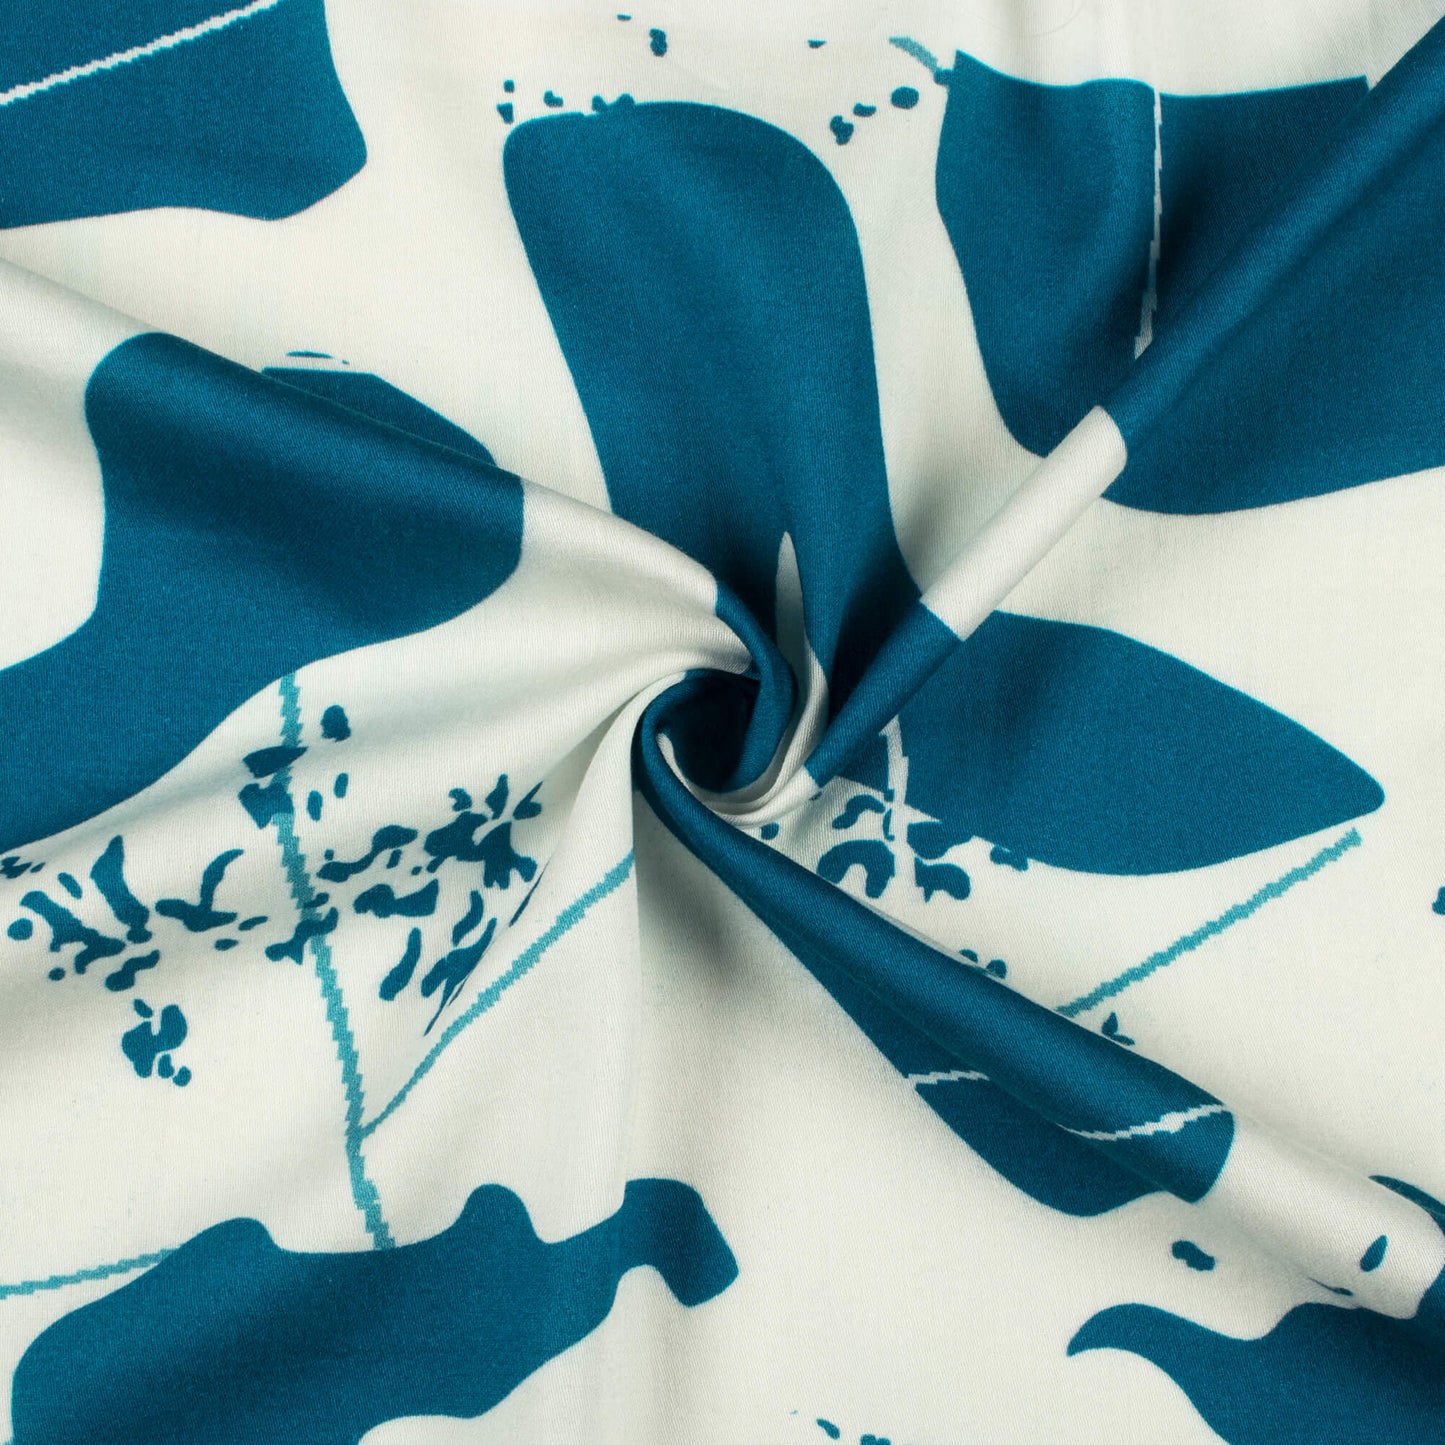 Purssian Blue And White Abstract Digital Print Viscose Rayon Fabric(Width 58 Inches)